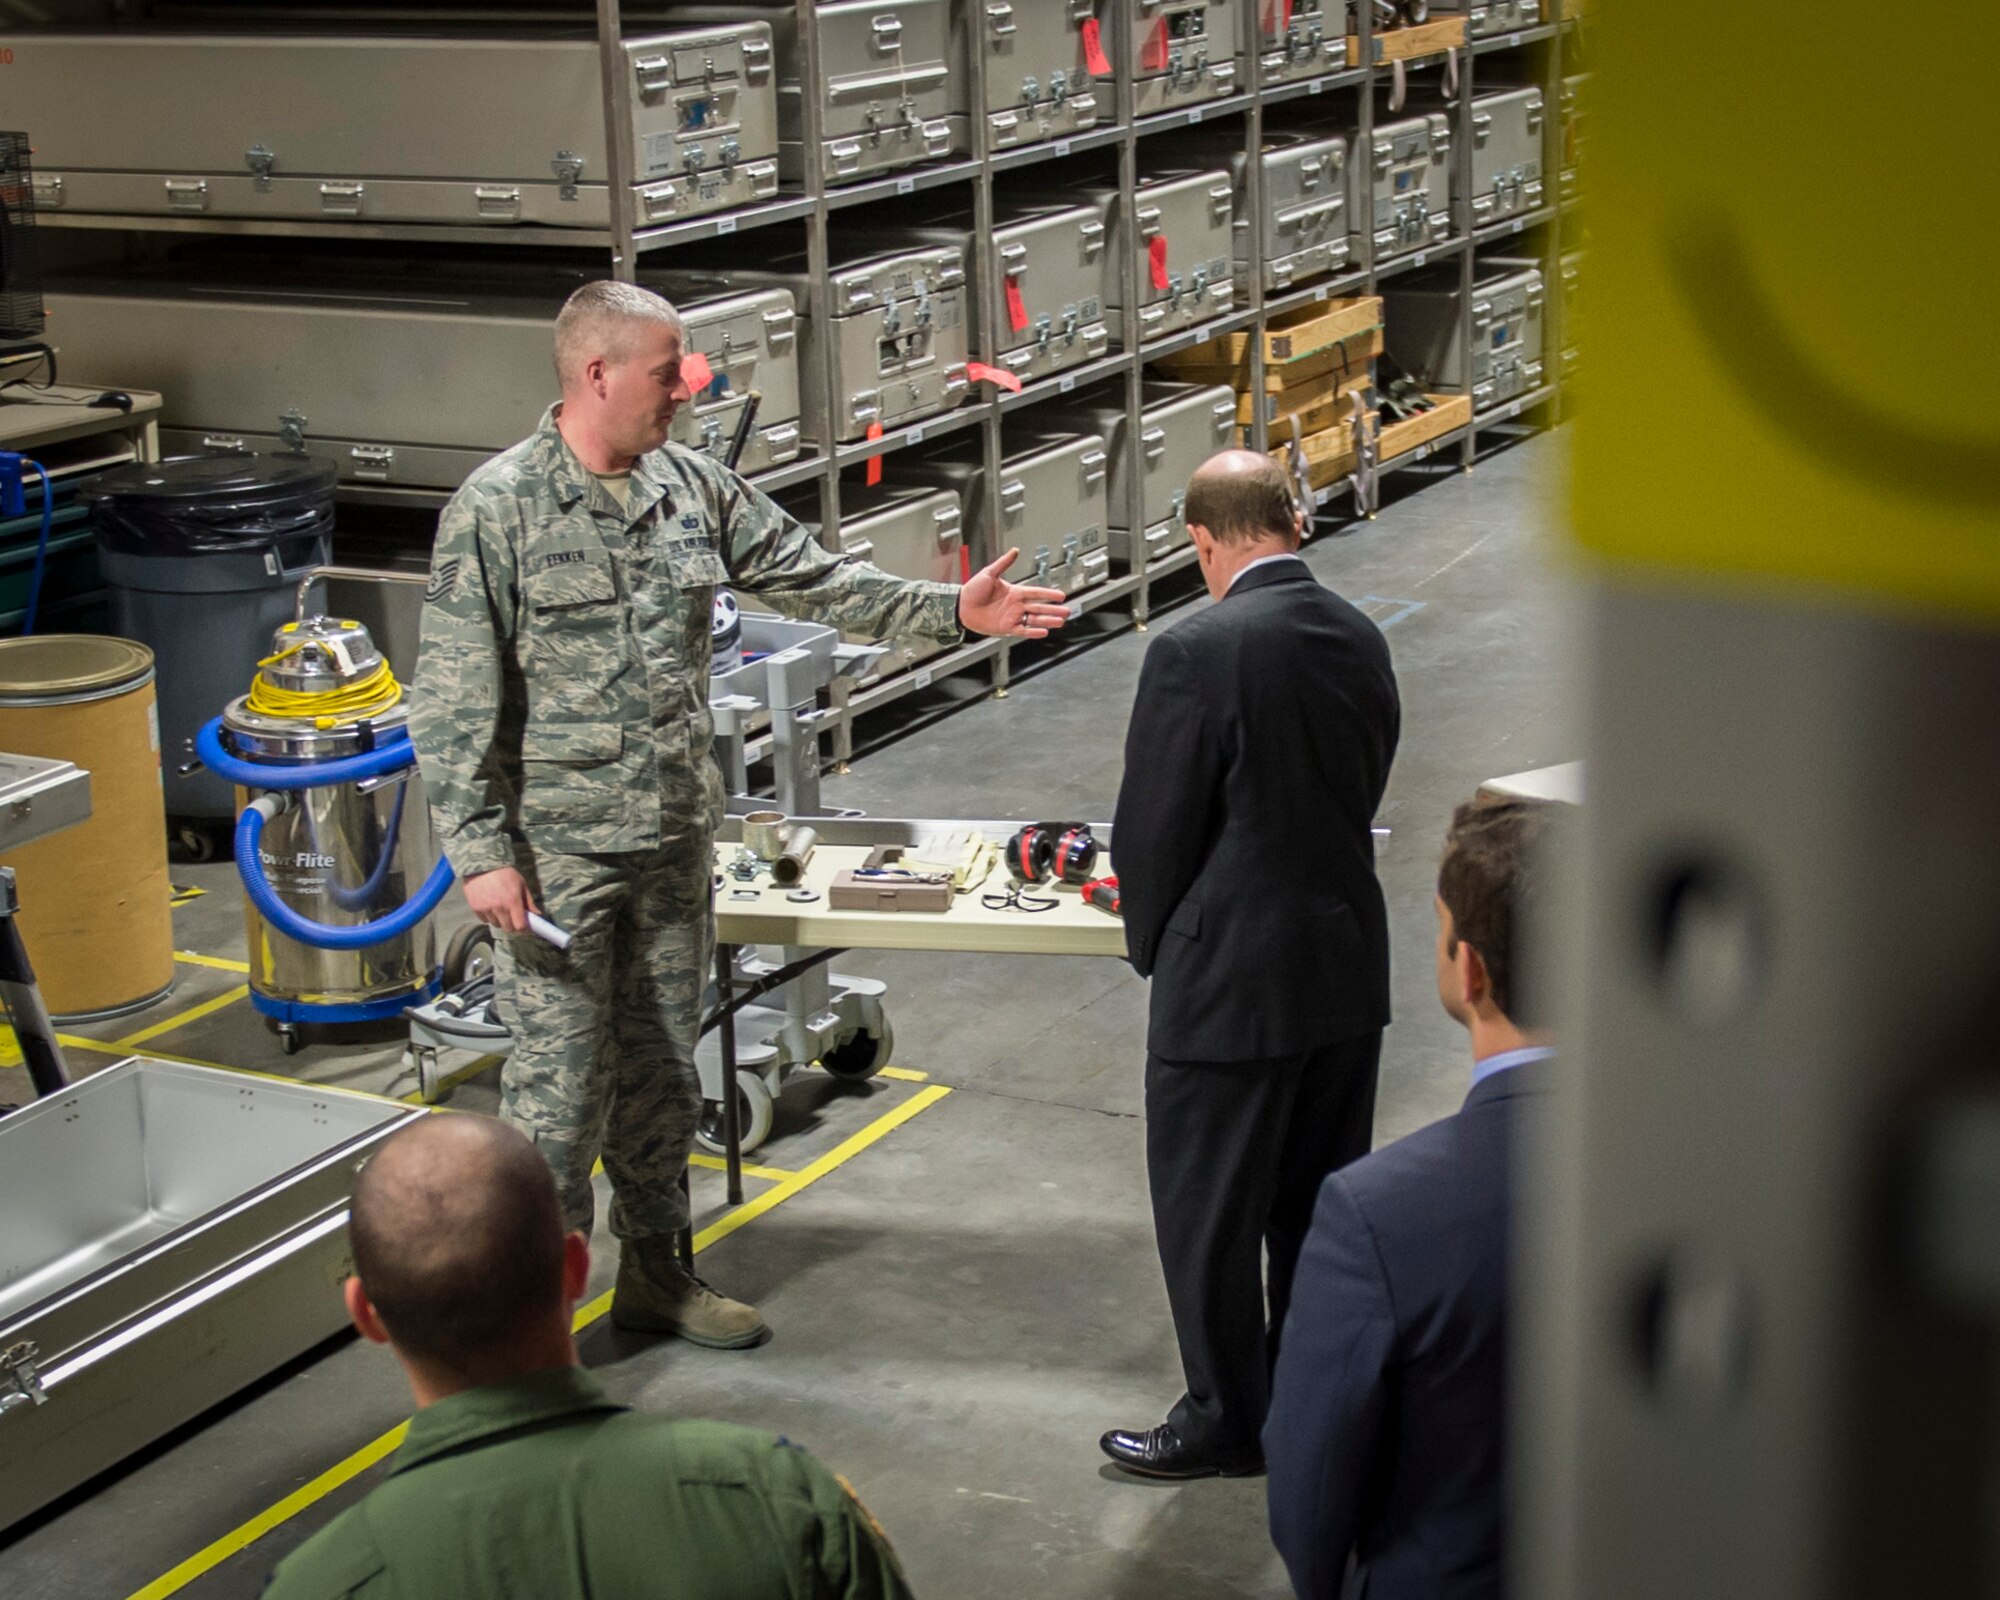 Tech. Sgt. Rob Fekken, Air Force Mortuary Affairs Operations facility manager, briefs Sen. Chris Coons of Delaware on the process of repairing human remains transfer cases Feb. 9, 2015, during the senator’s visit to Dover Air Force Base, Del. Fekken explained that AFMAO inspects and, if required, services every transfer case that comes to AFMAO before returning them to the field. (U.S. Air Force photo by Capt. Ray Geoffroy)